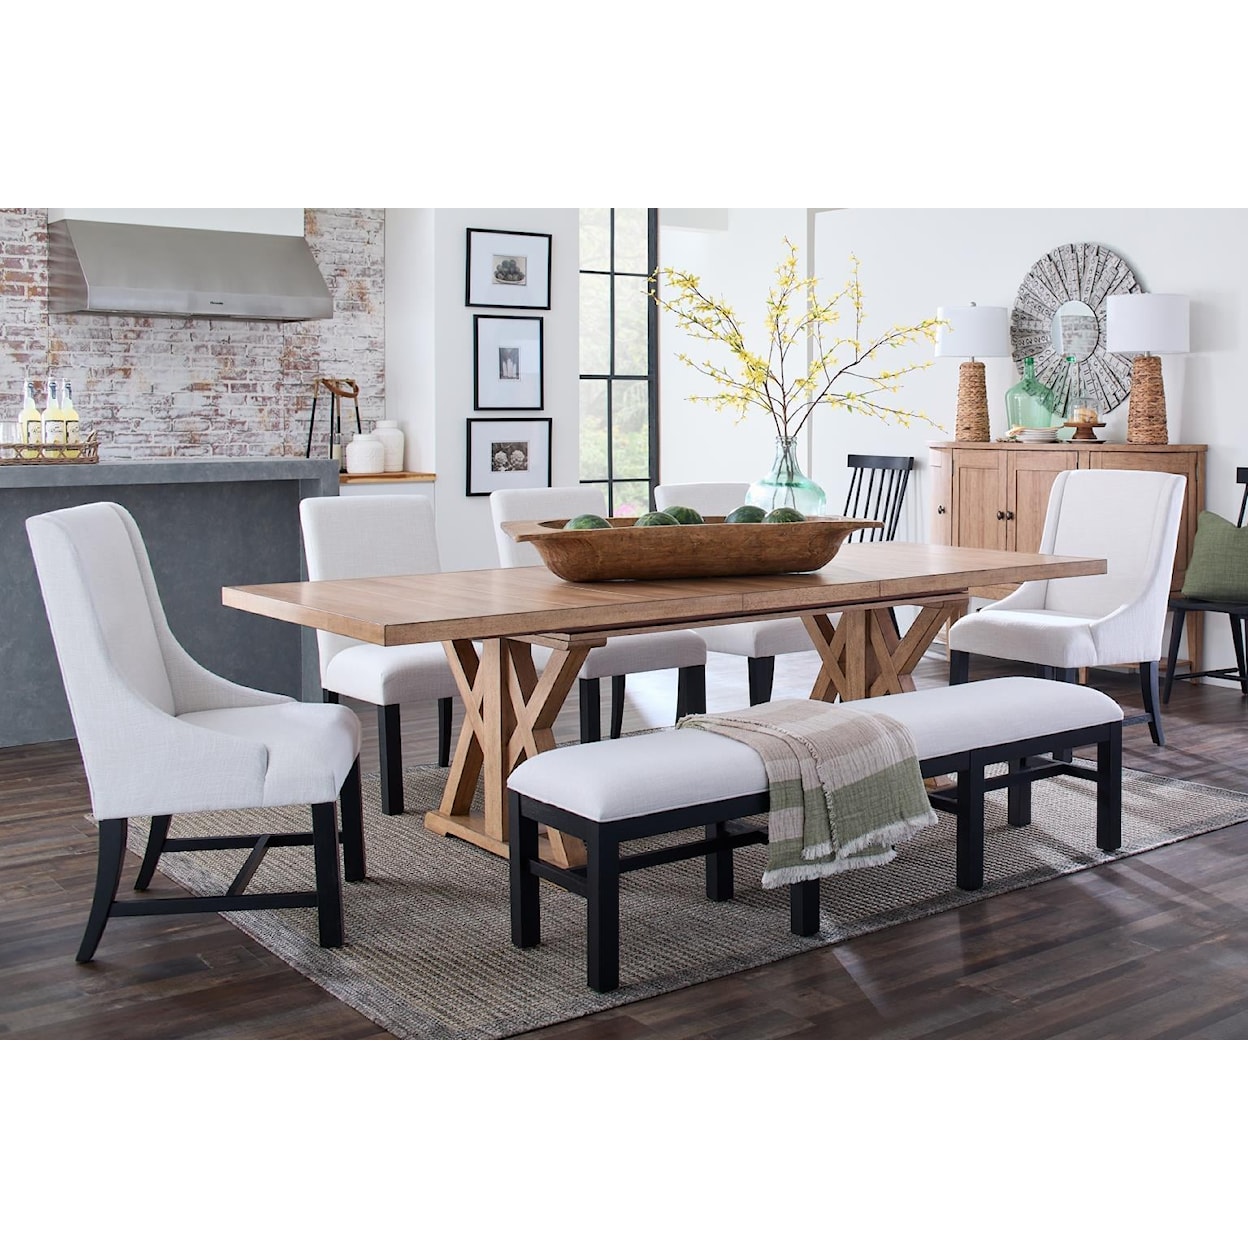 Trisha Yearwood Home Collection by Legacy Classic Today's Traditions 7-Piece Dining Set